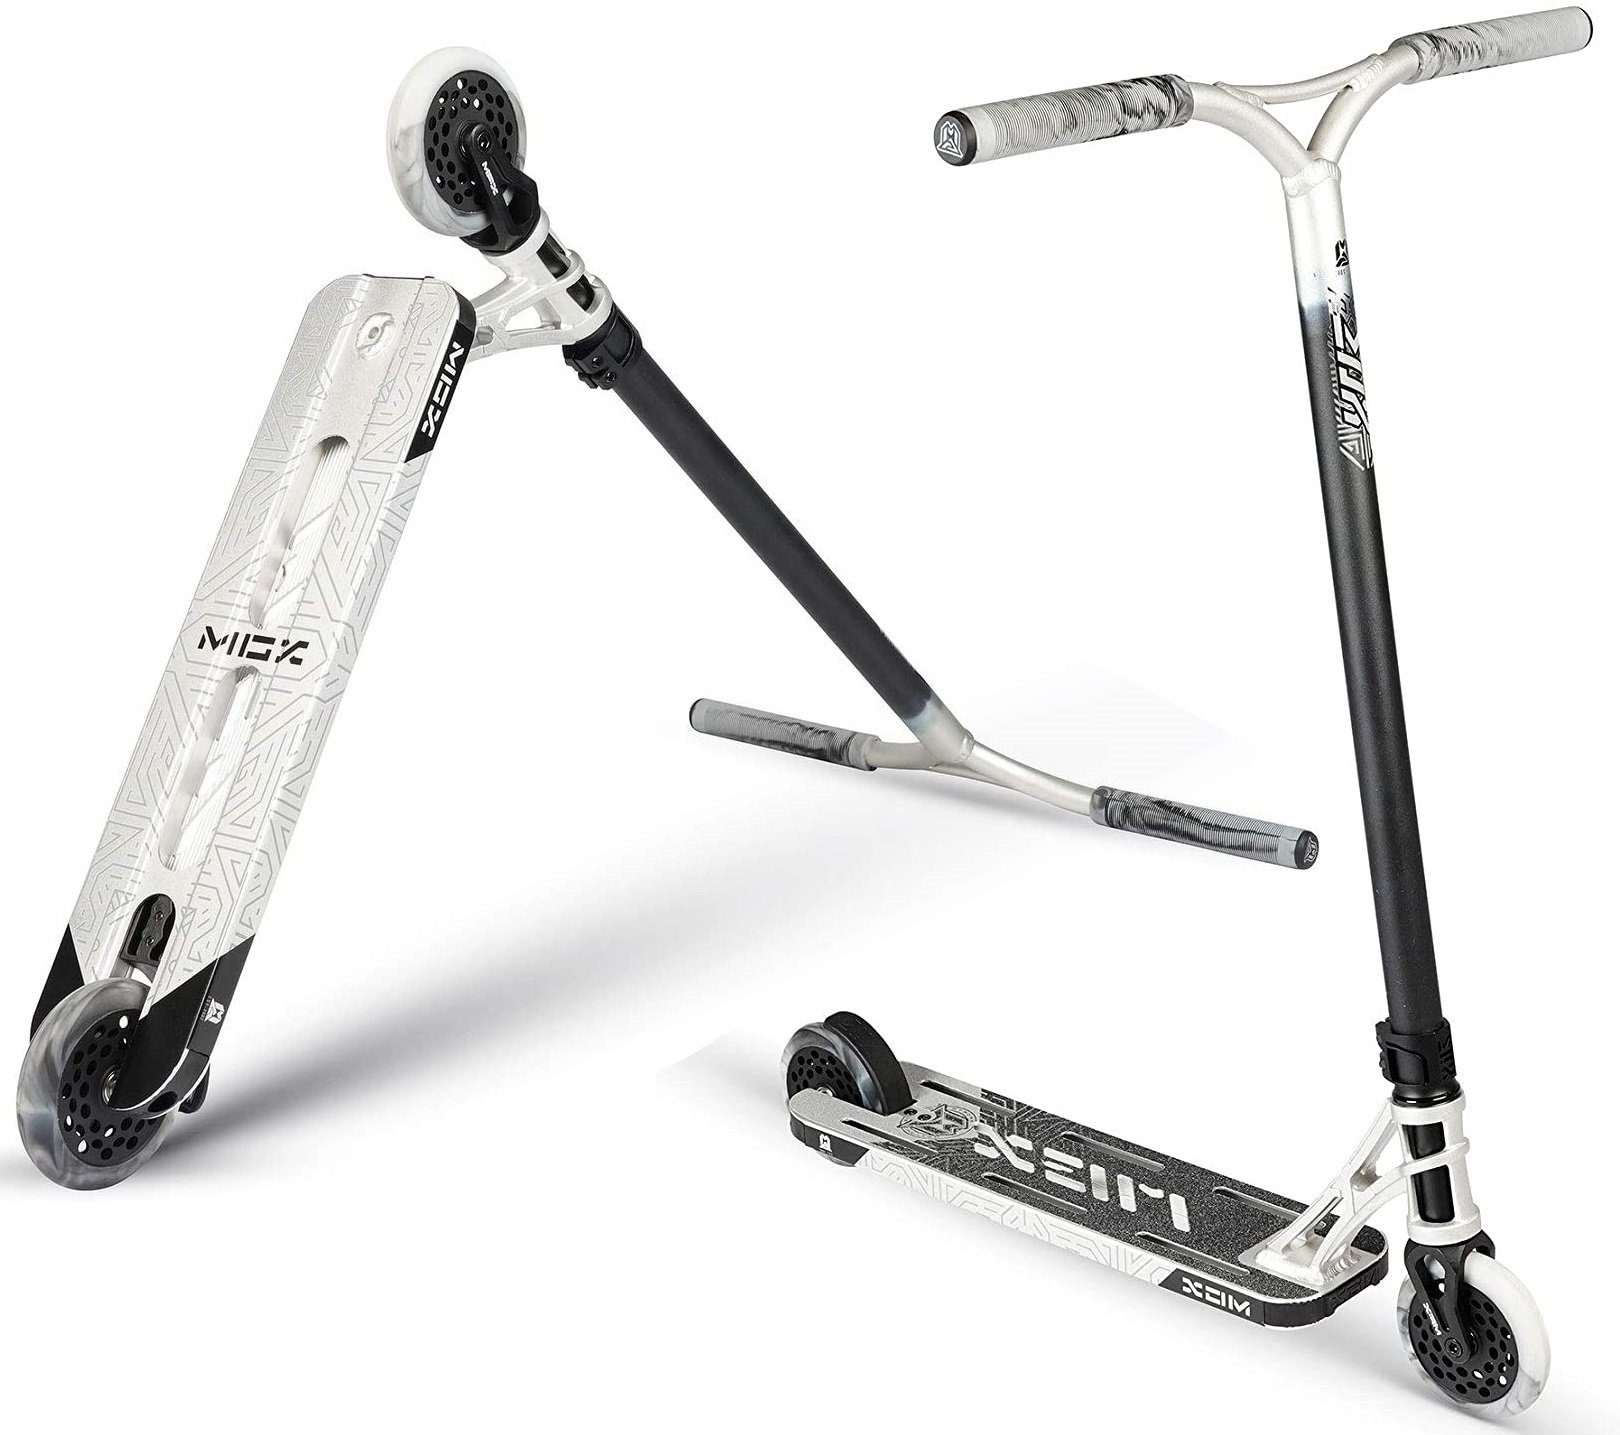 Madd Stuntscooter MGP Madd Gear MGX Extreme Stunt-Scooter H=90cm schwarz/silber (23400) | Stuntscooter